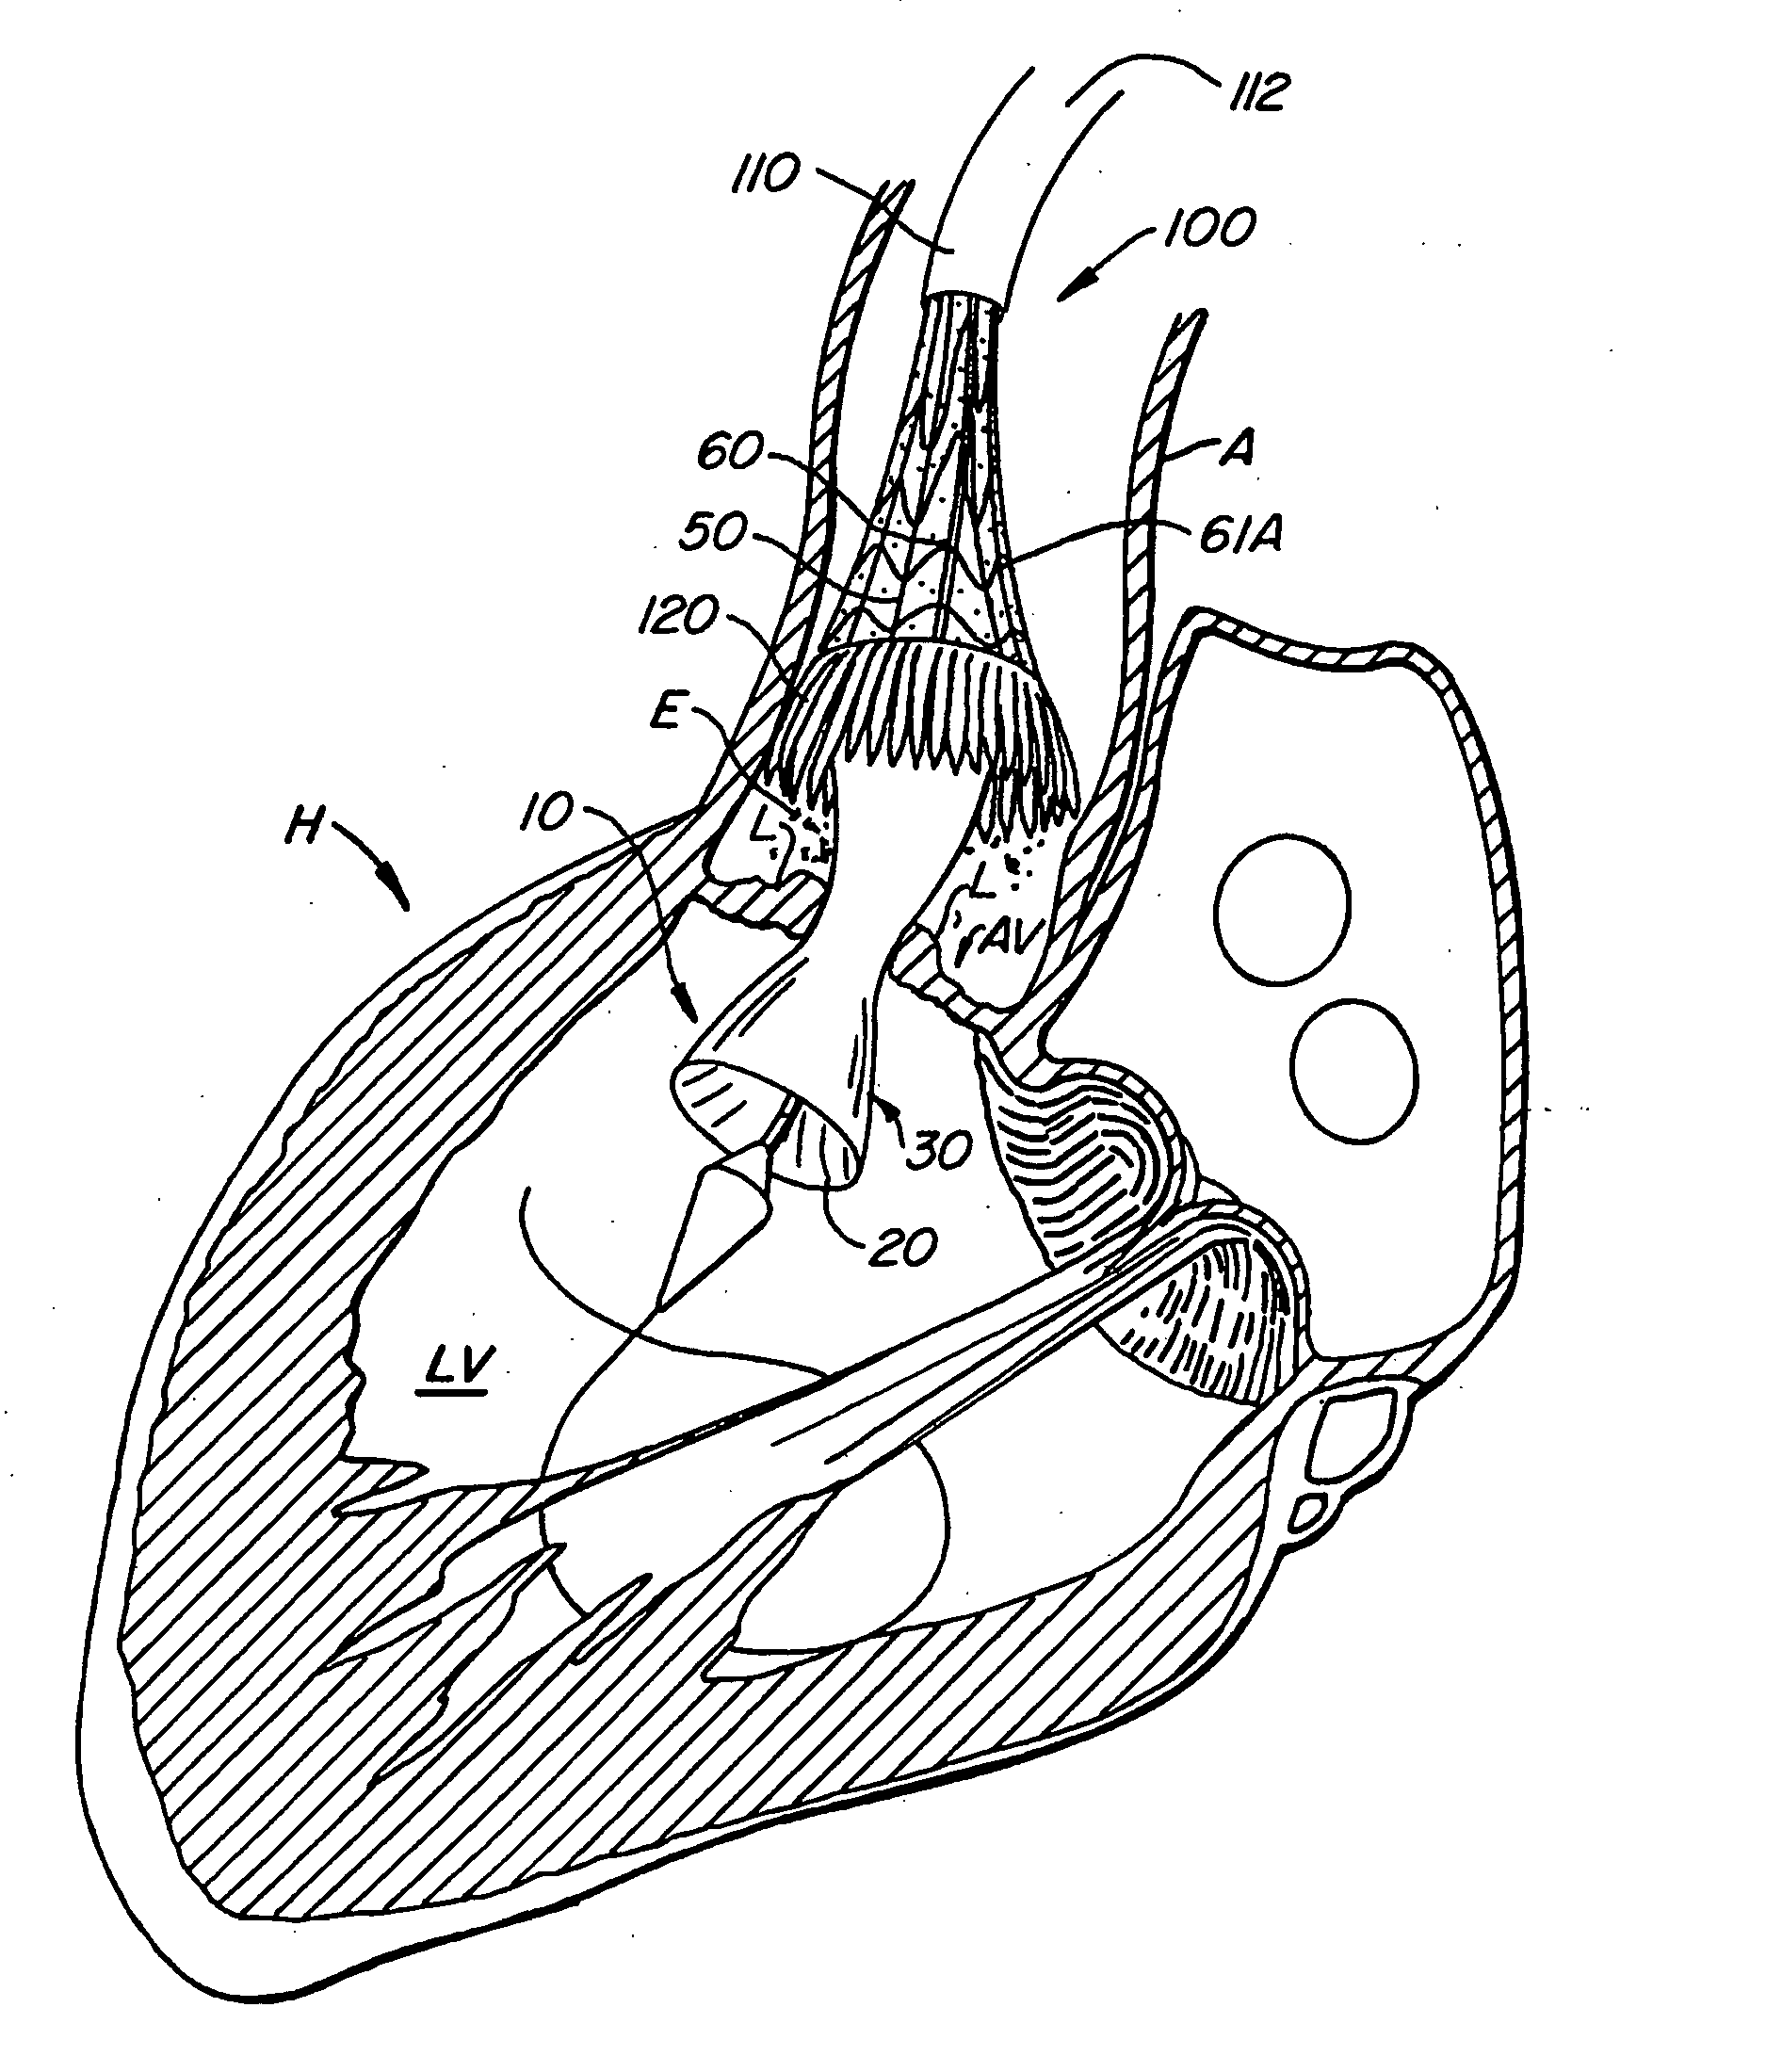 Apparatus and methods for protecting against embolization during endovascular heart valve replacement